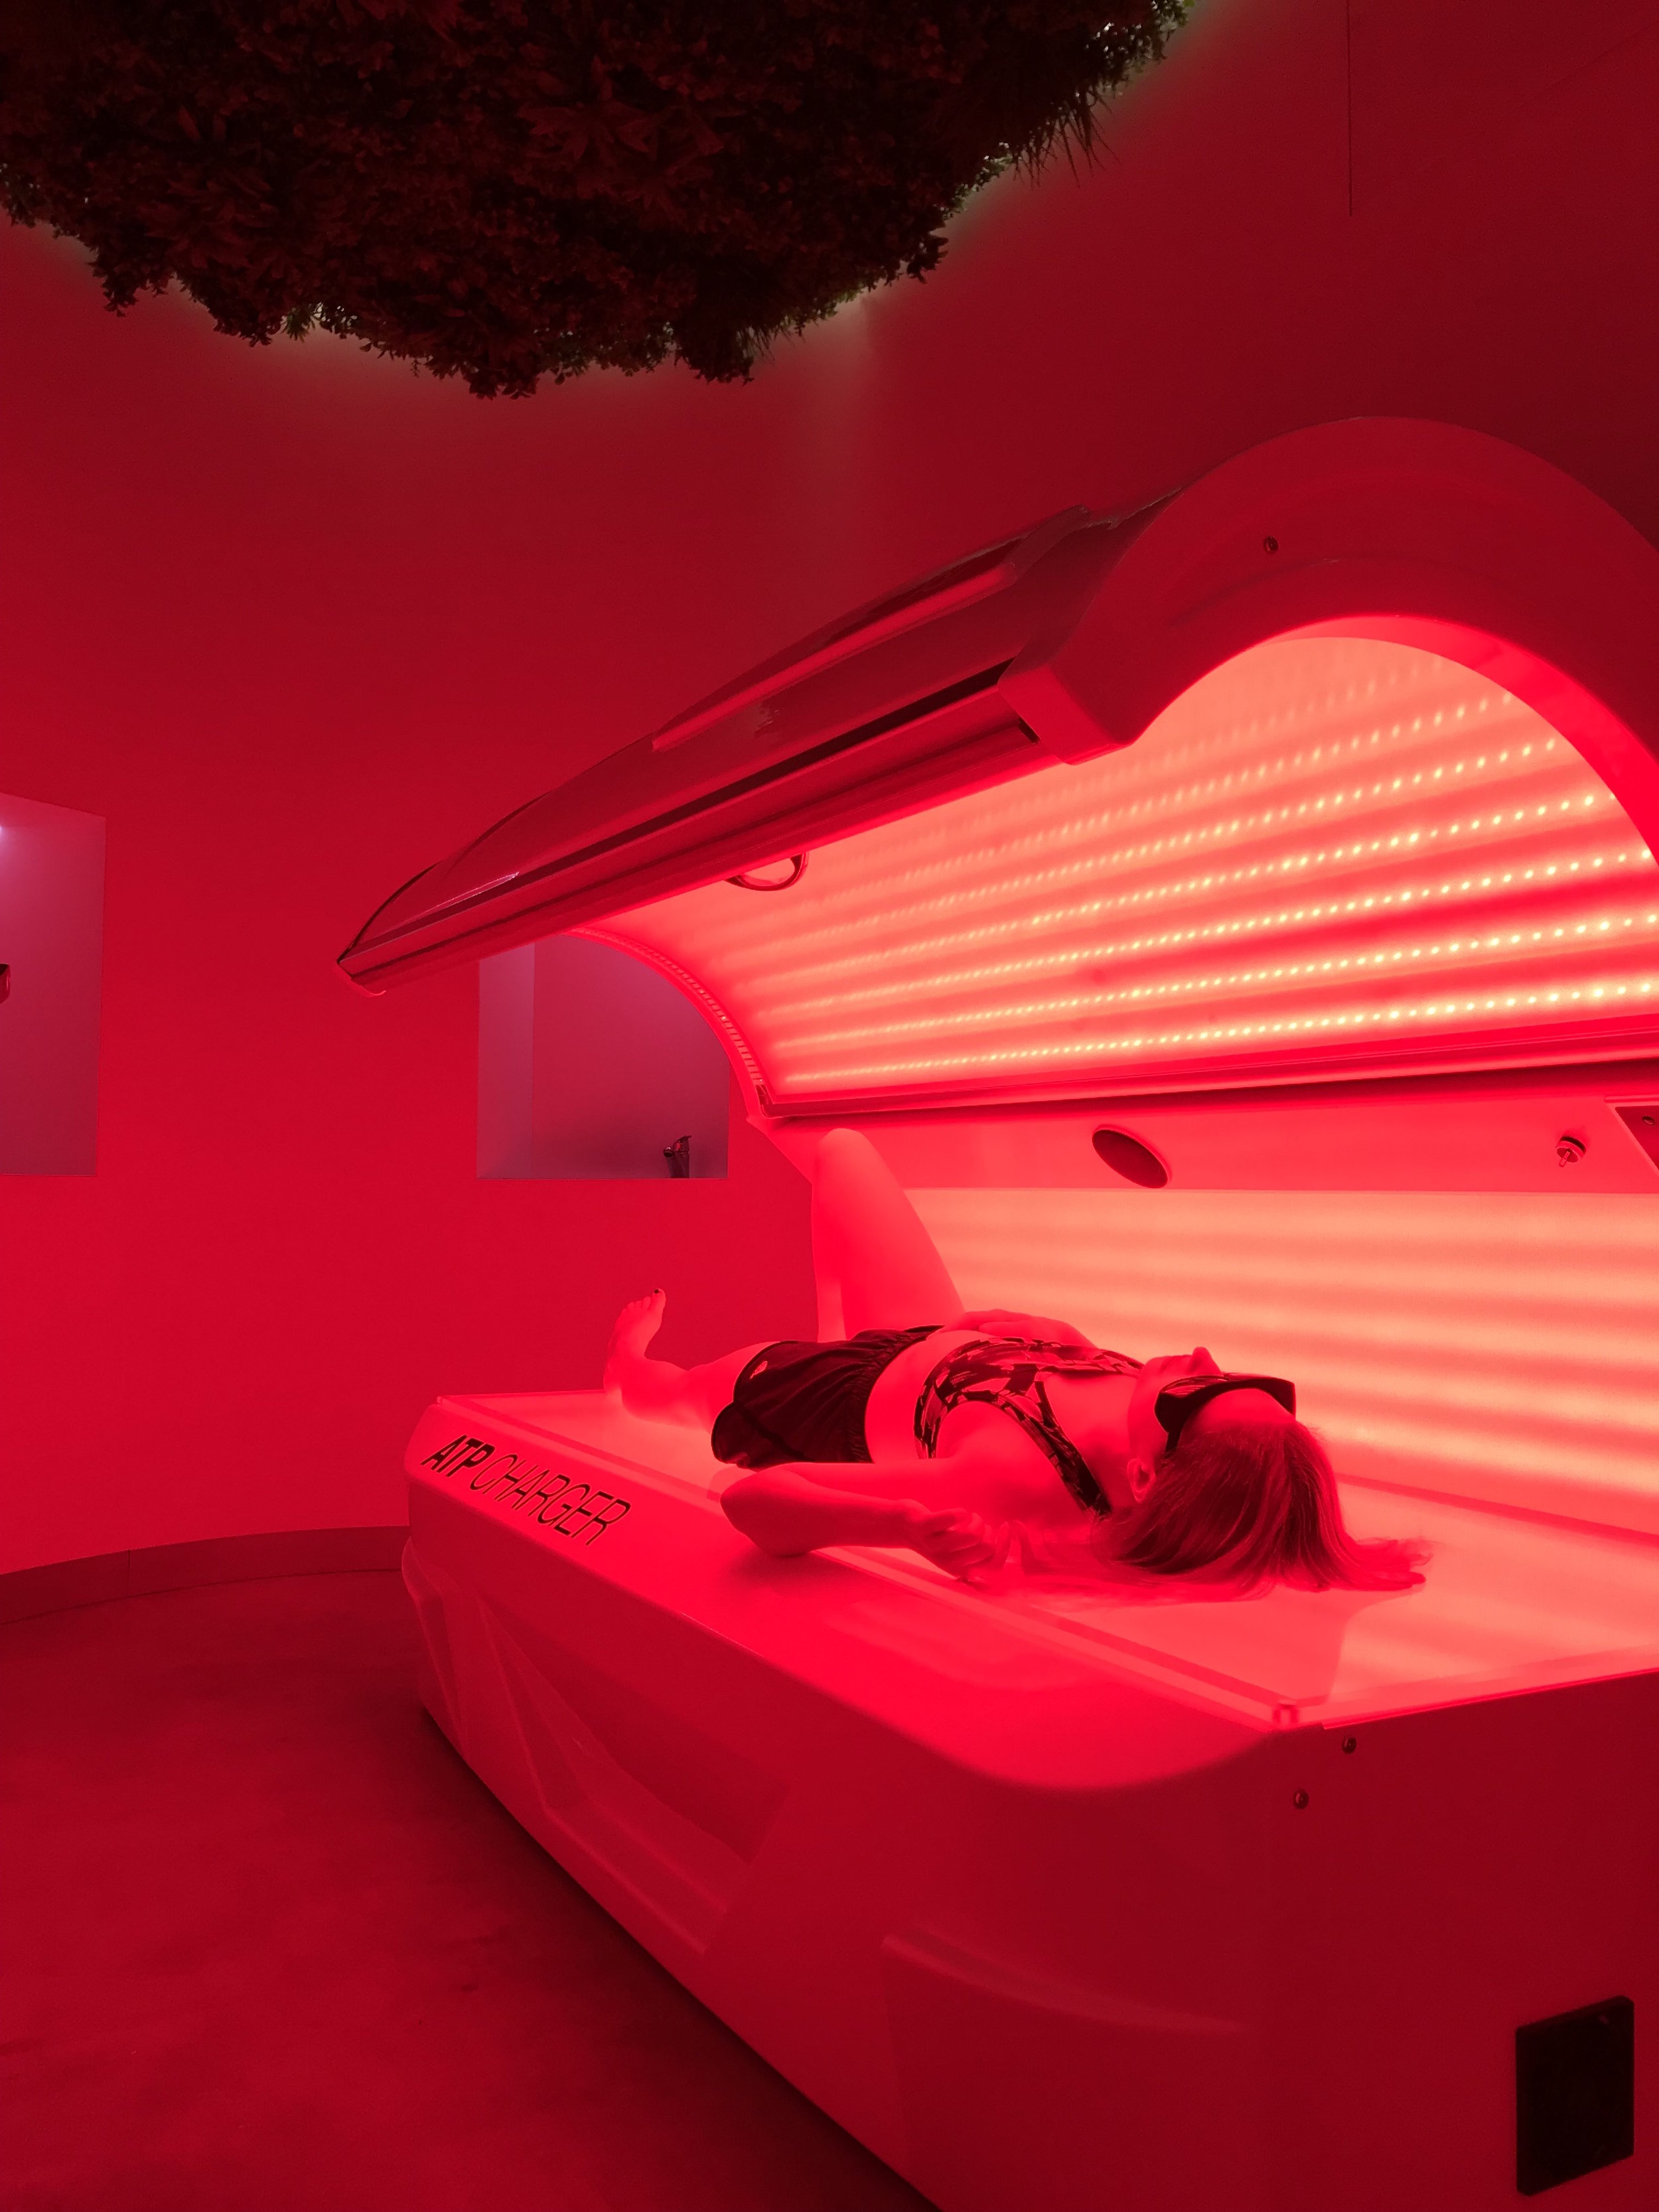 What Is Red Light Therapy Tanning